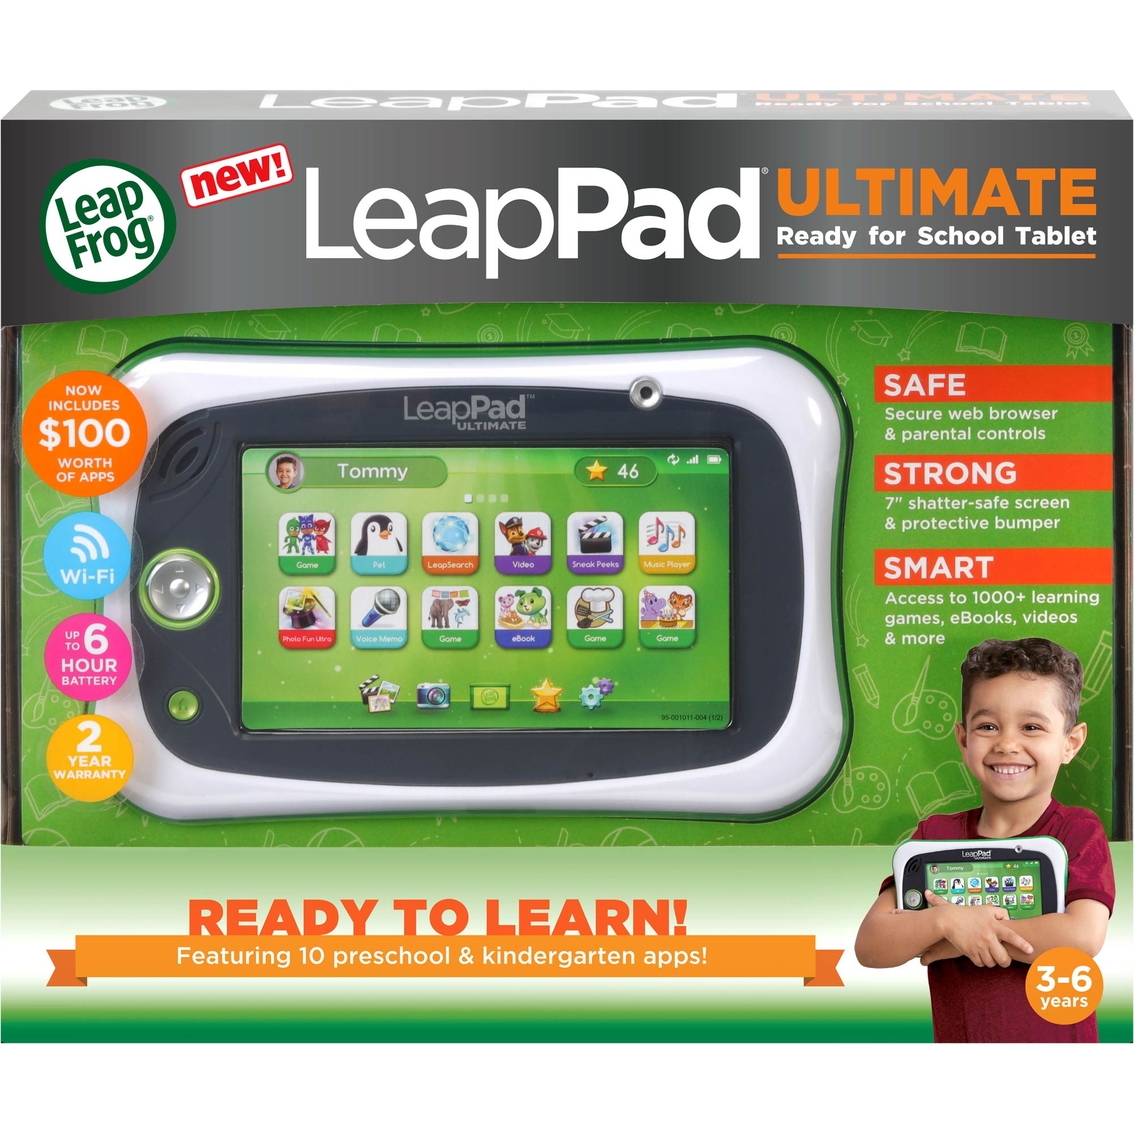 Leapfrog Leappad Ultimate Ready For School Tablet Tablets Software Baby Toys Shop The Exchange